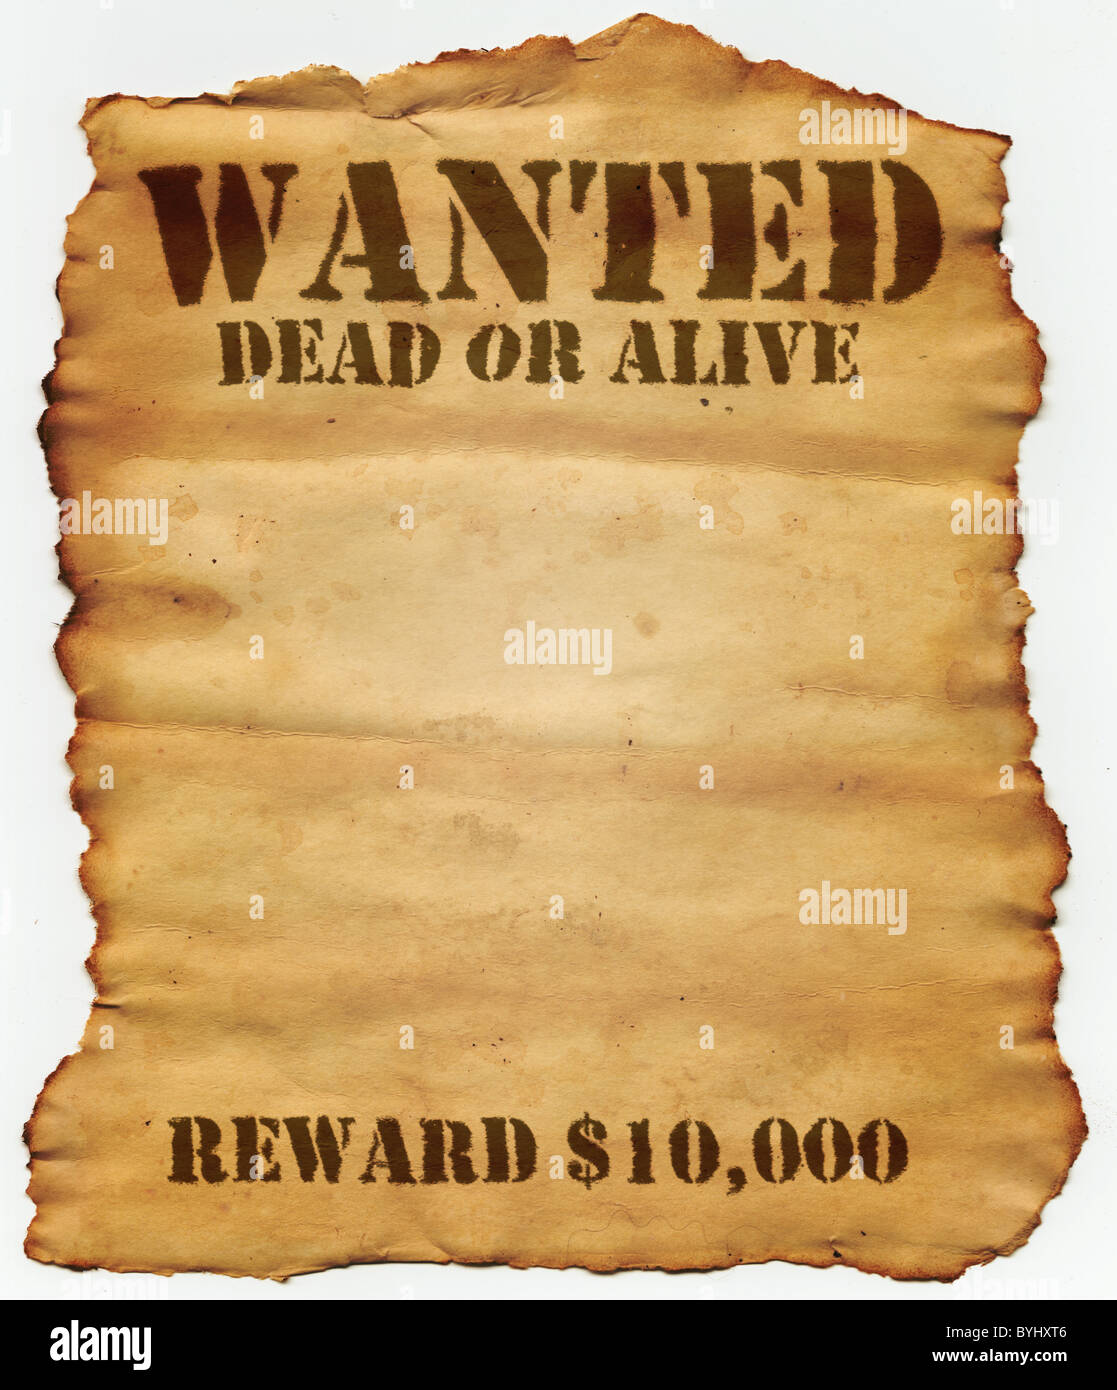 Wanted Dead or Alive Stock Photo